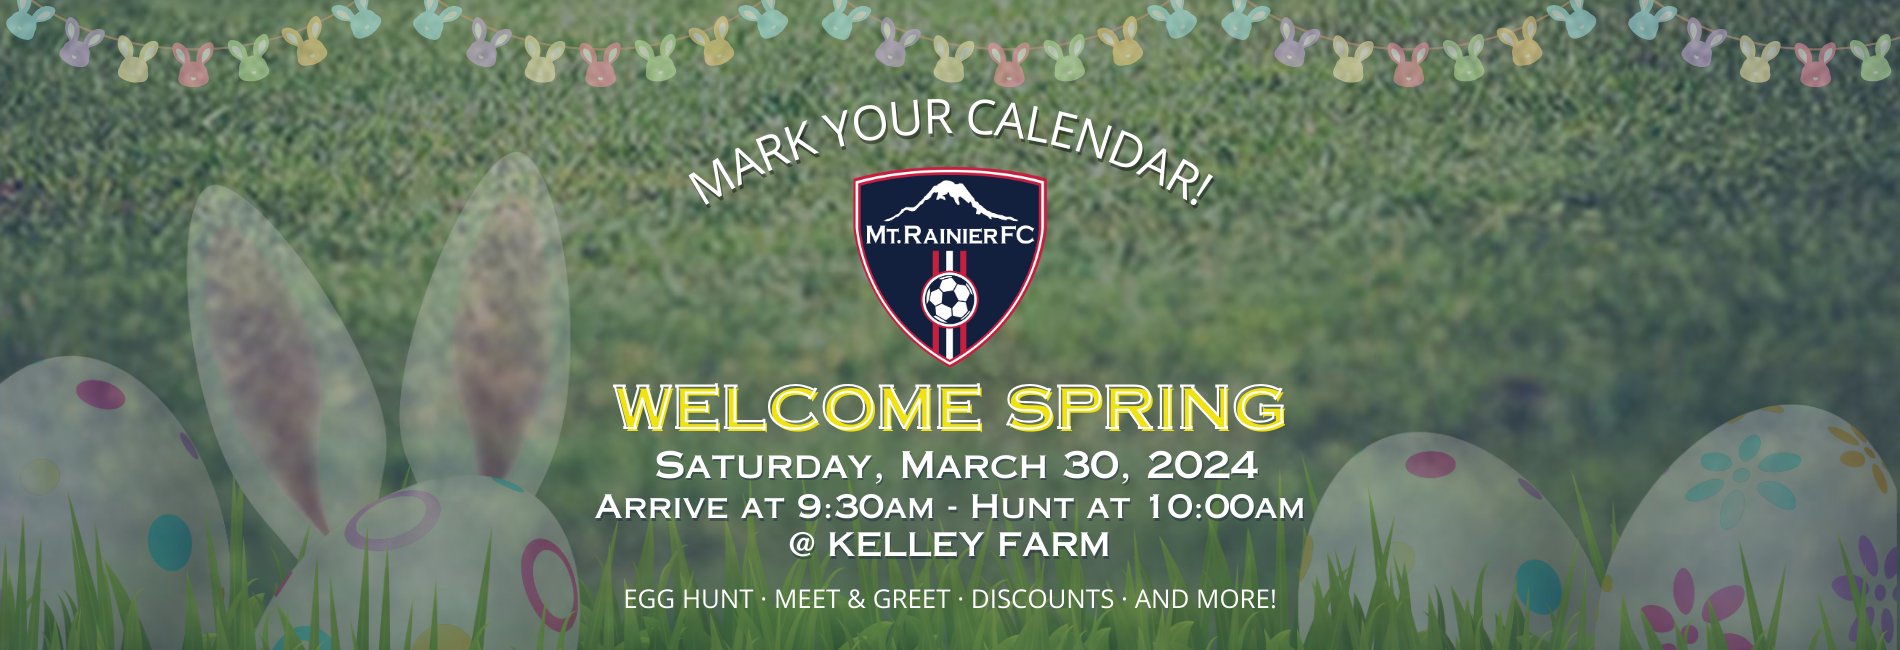 Welcome Spring Egg Hunt March 30th